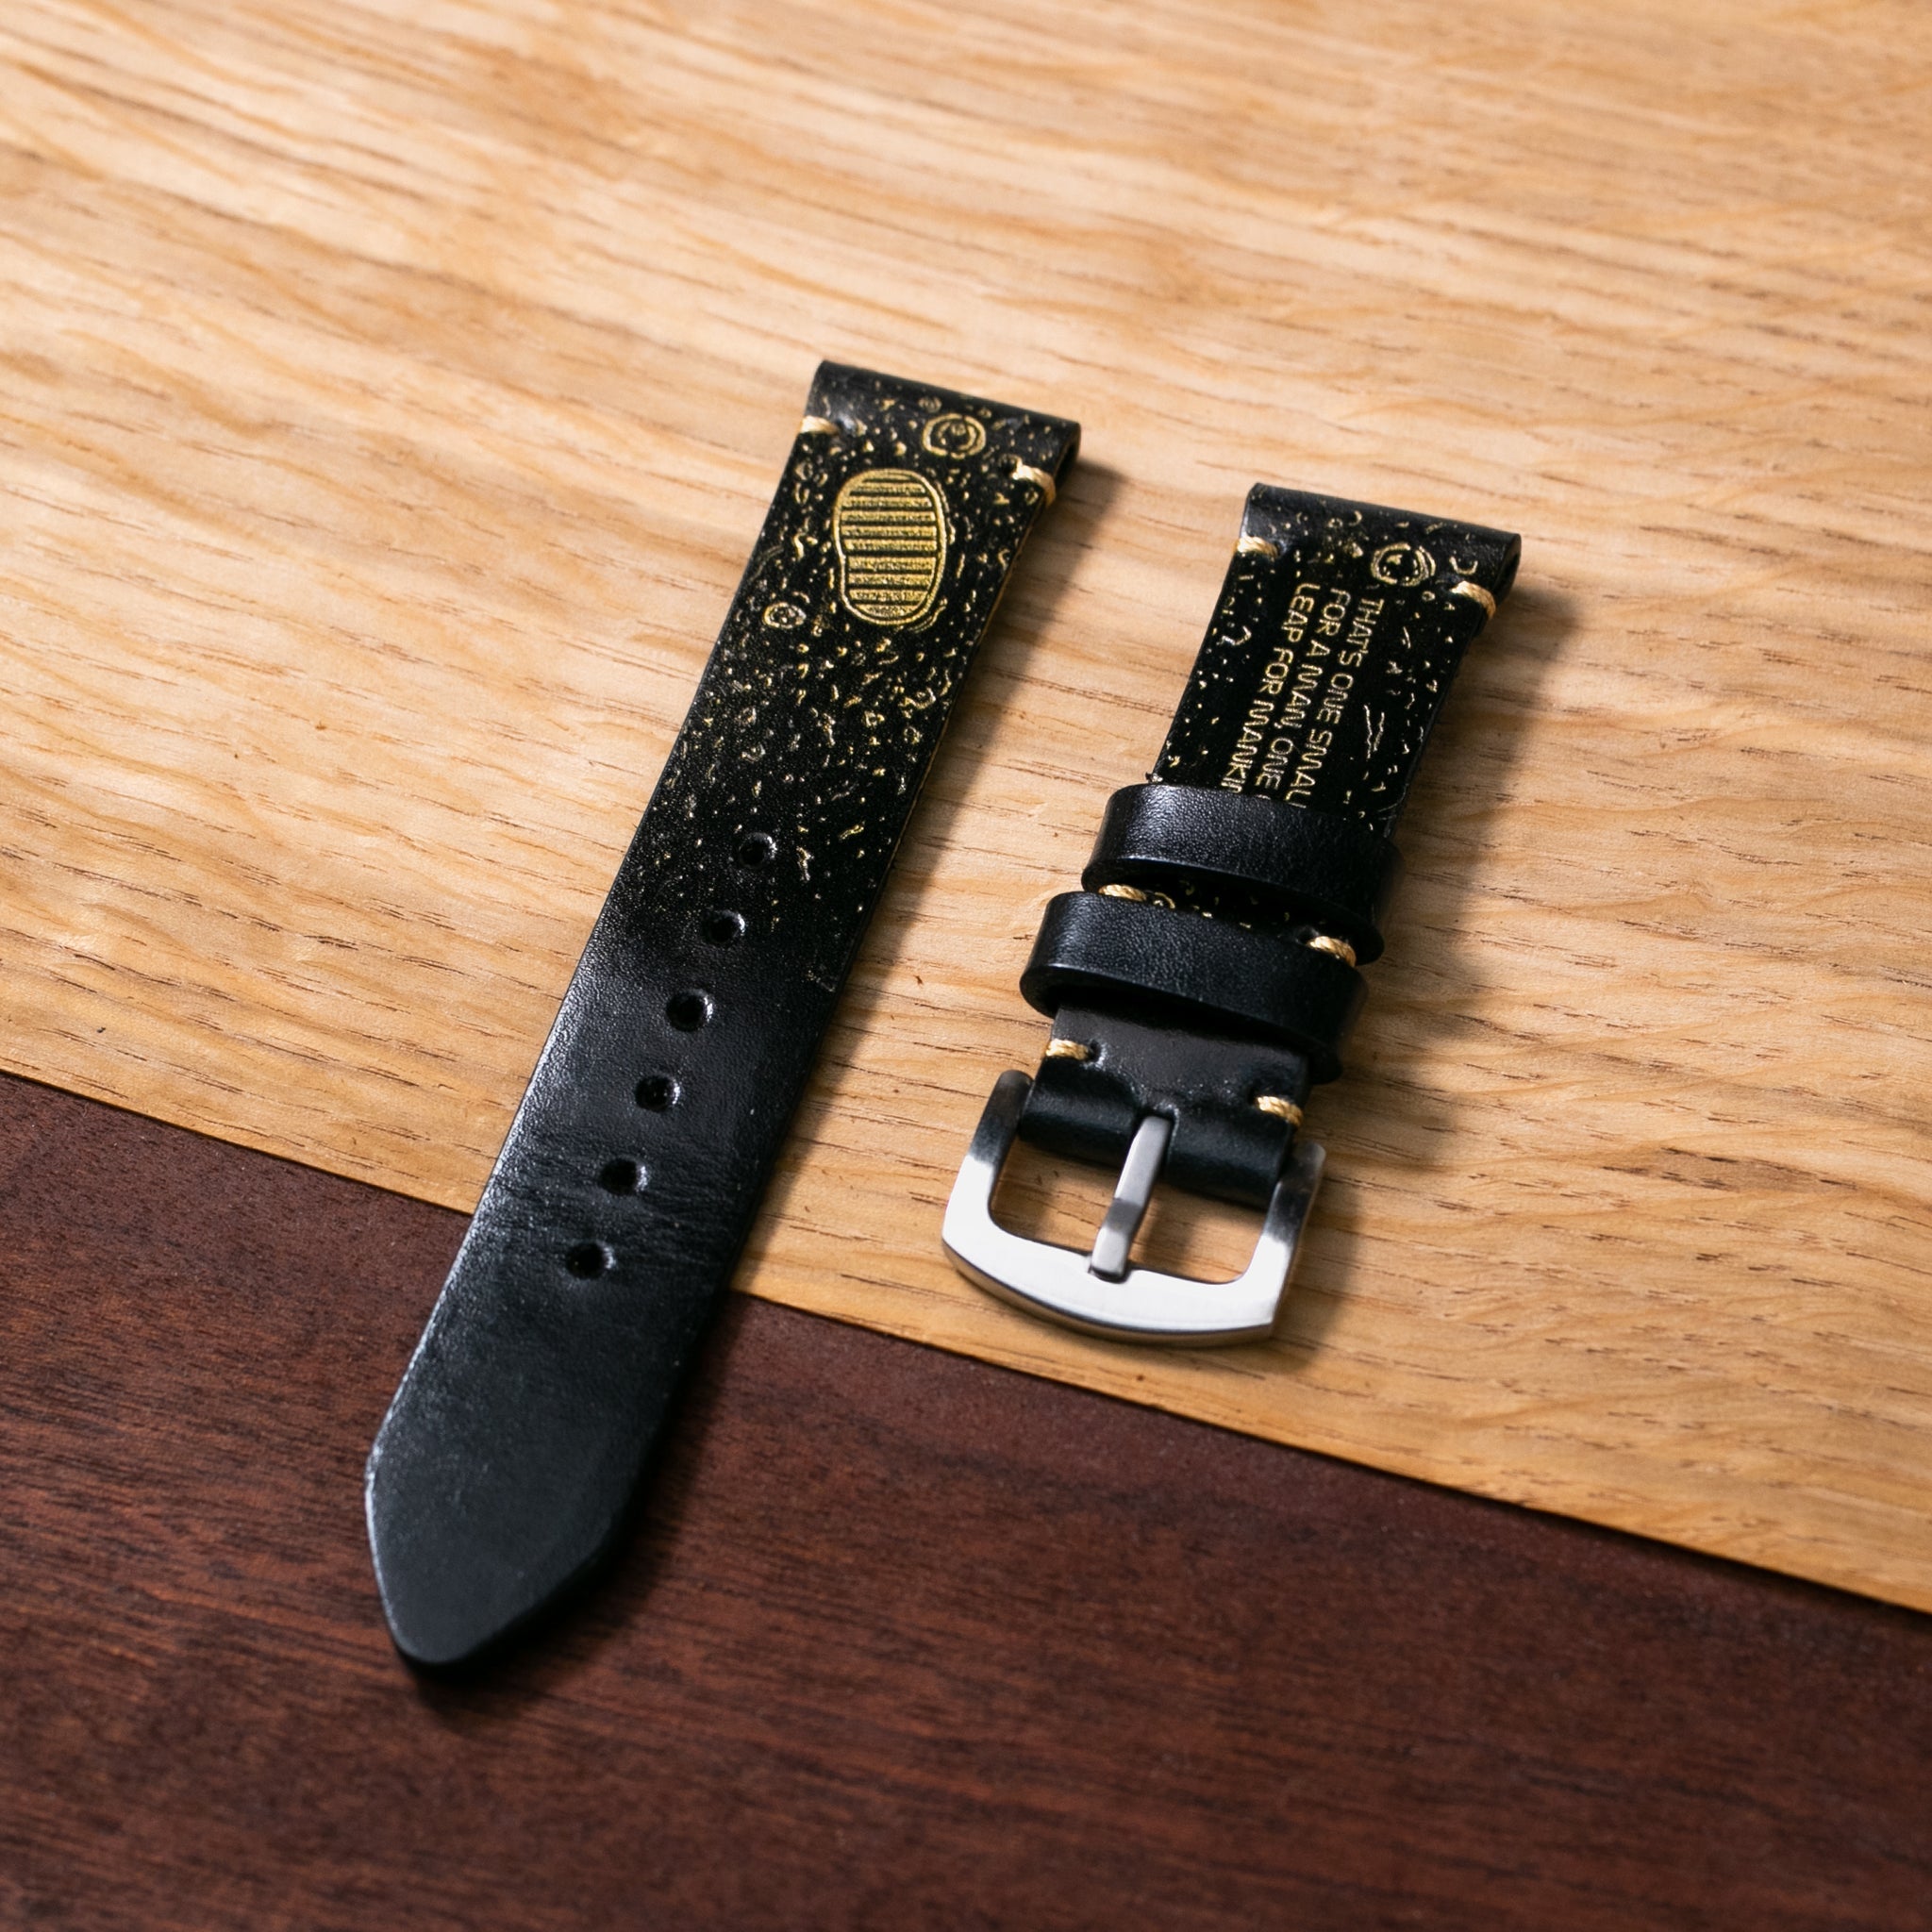  Leather Watch Strap